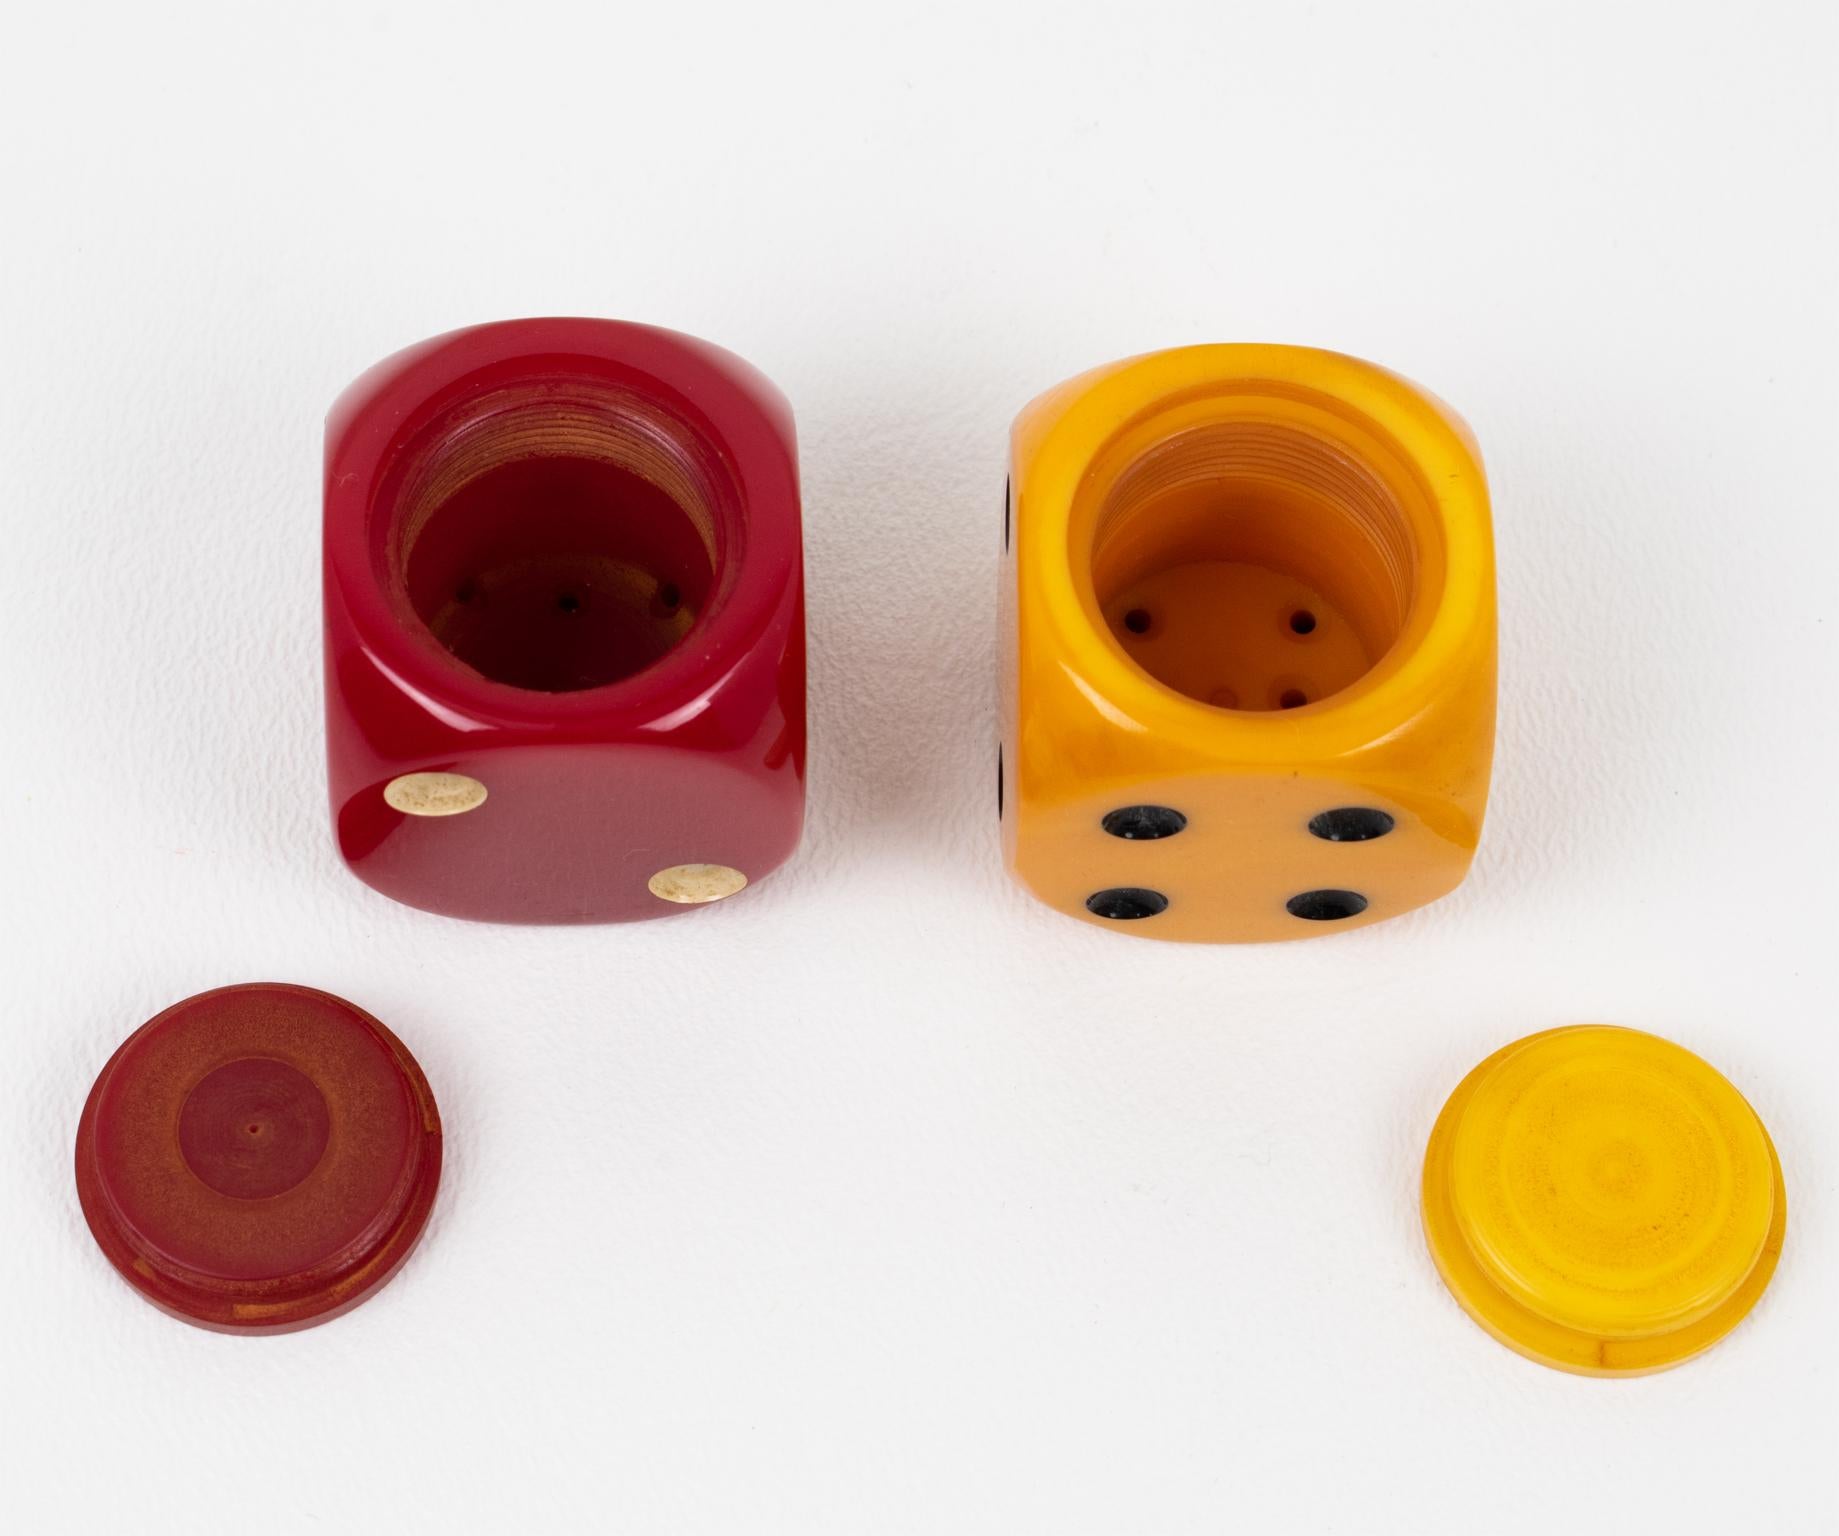 Mid-20th Century Art Deco Red, Yellow Bakelite Dice-Shaped Condiment Salt and Pepper Shakers Set For Sale